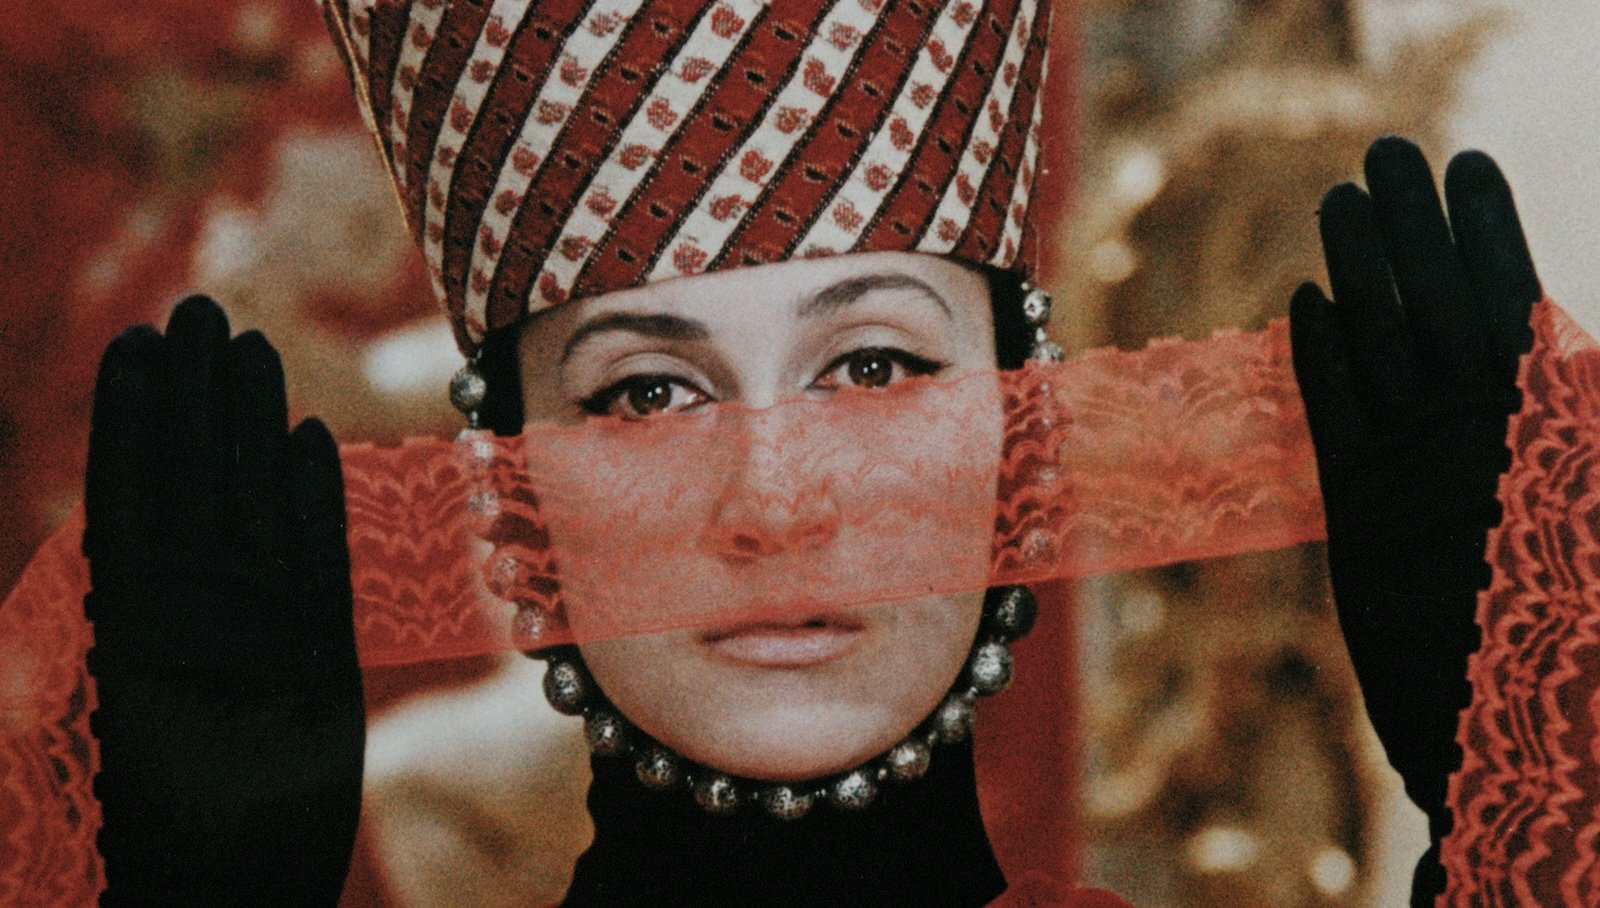 A person in an elaborate red and white hat that looks more like a royal crown holds a gossamer red scarf up to her face, wearing black gloves